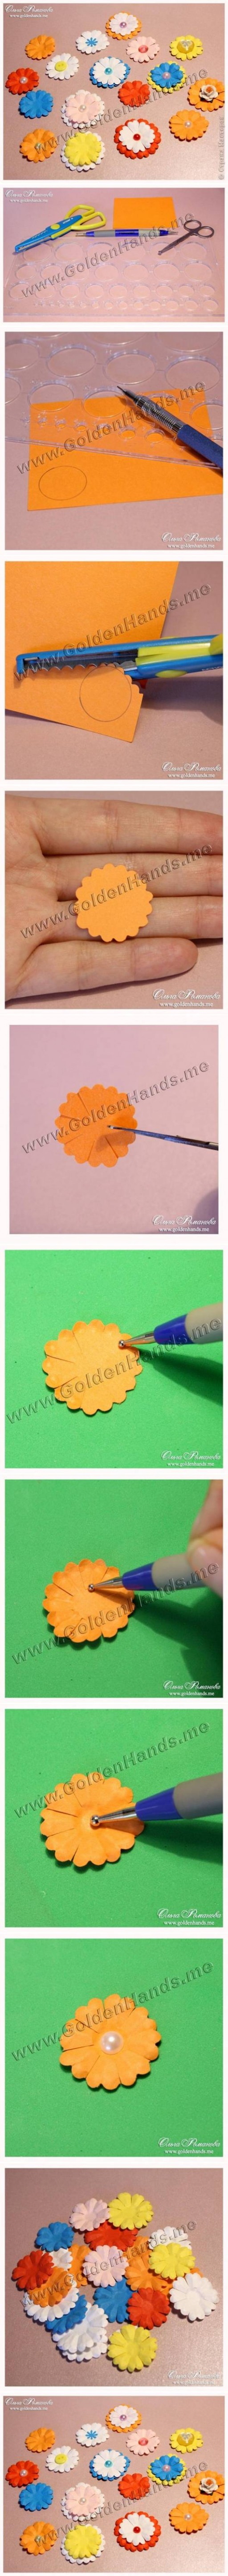 How To Make Easy Paper Flowers step by step DIY tutorial instructions